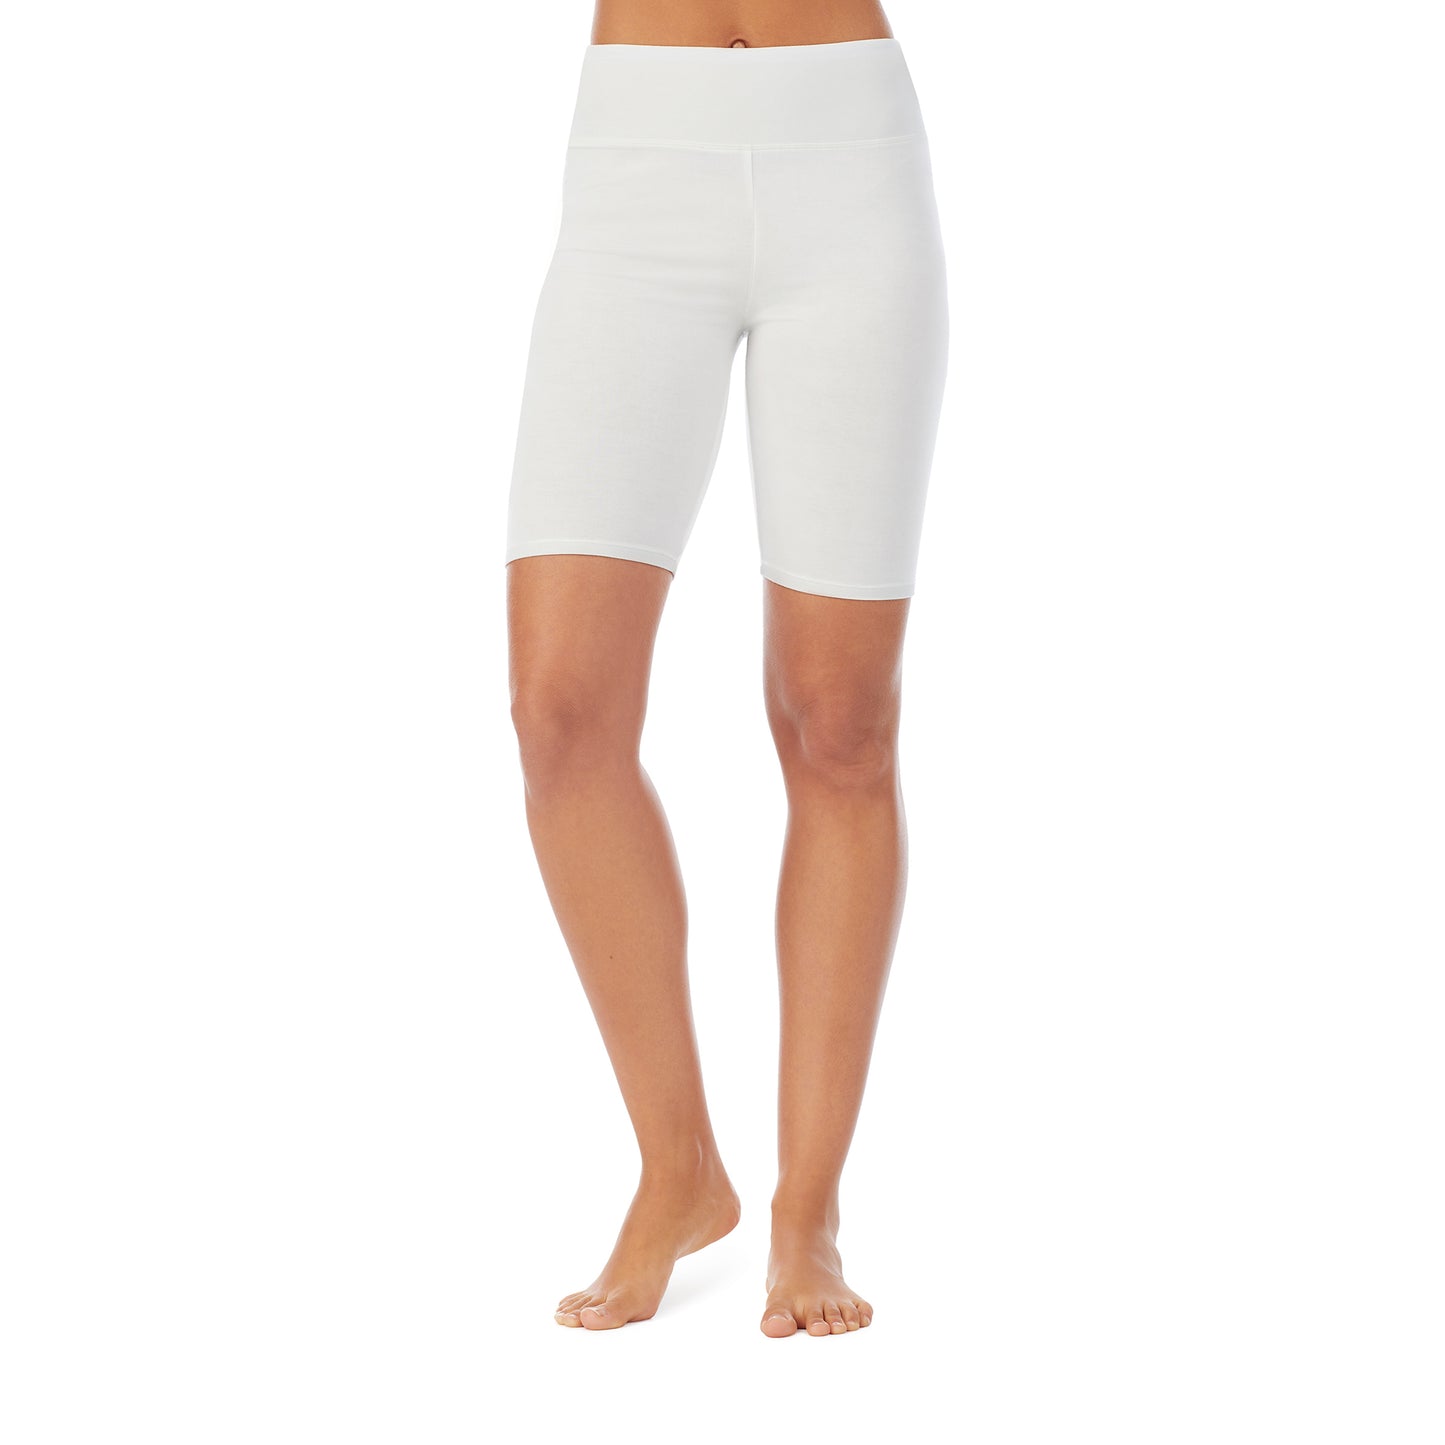  Ivory; Model is wearing size S. She is 5'8.5", Bust 32", Waist 25", Hips 36". @A lady wearing a ivory short.